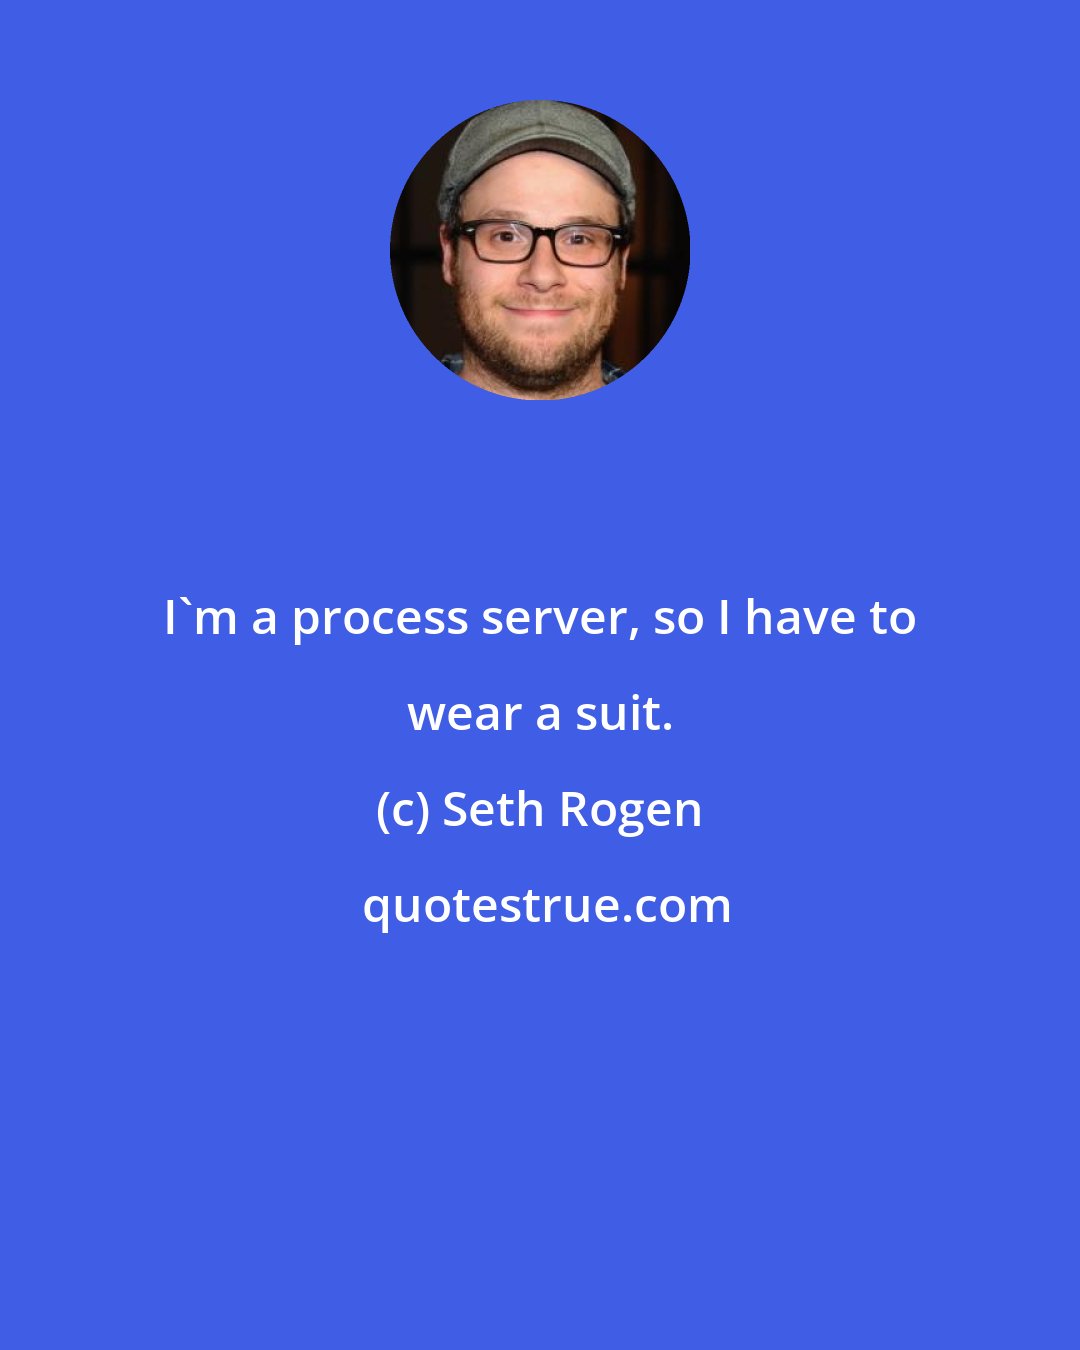 Seth Rogen: I'm a process server, so I have to wear a suit.